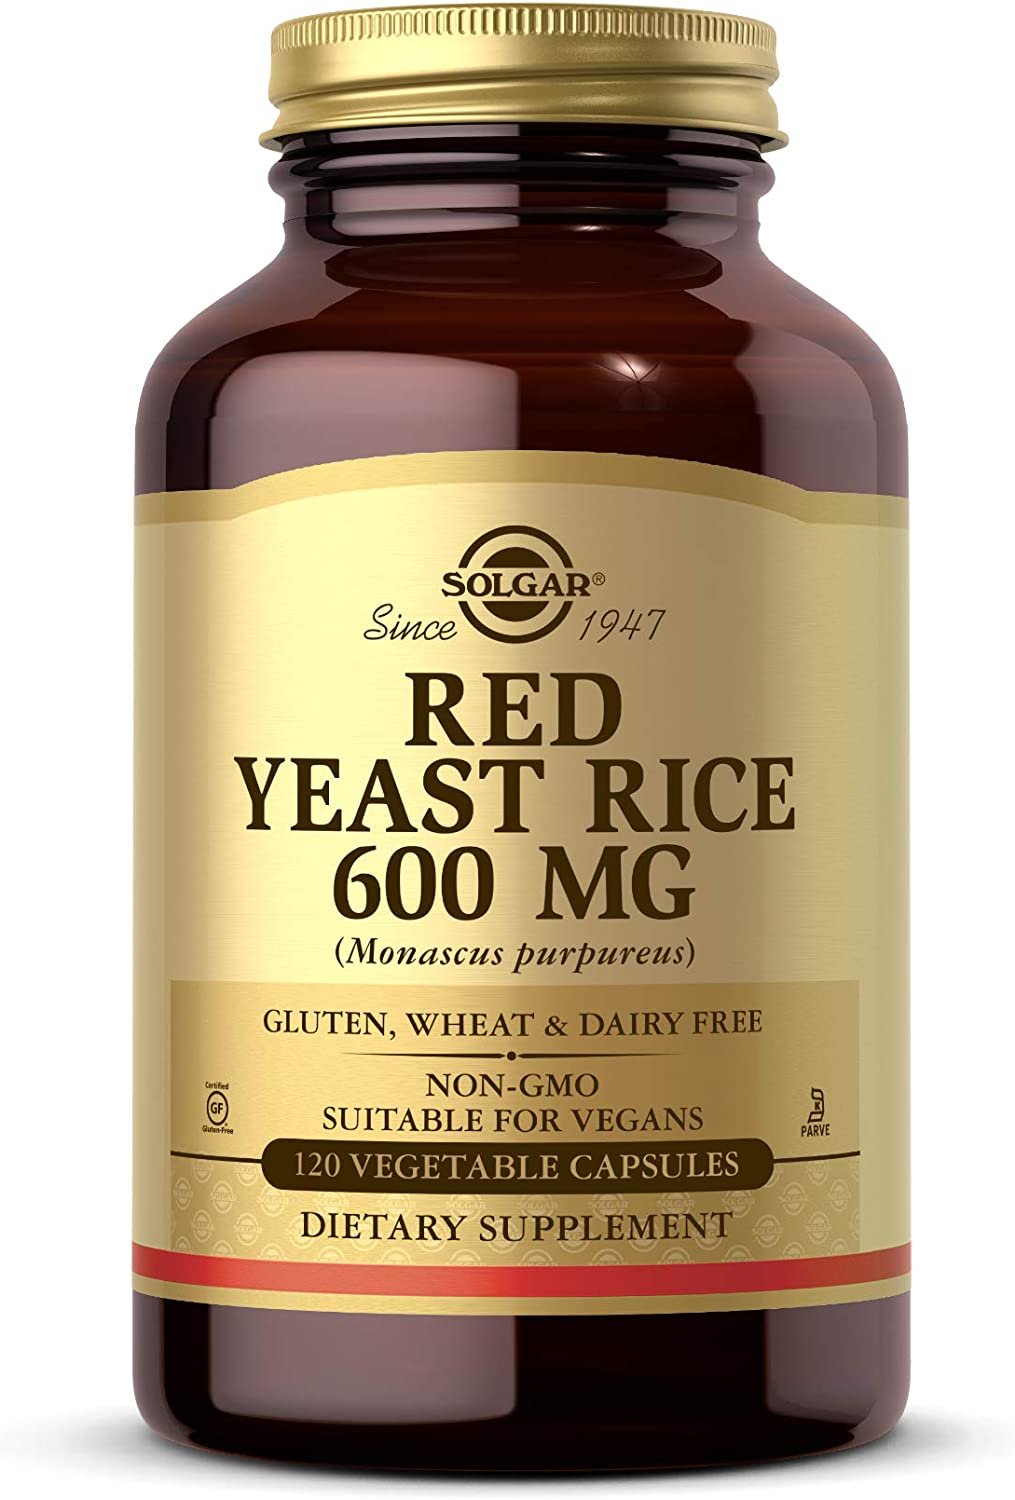 Solgar Red Yeast Rice 600 mg, 120 Vegetable Capsules - Supports Heart Health - Fermented to Increase Bioavailability - Non-GMO, Vegan, Gluten Free, Dairy Free, Kosher - 60 Servings